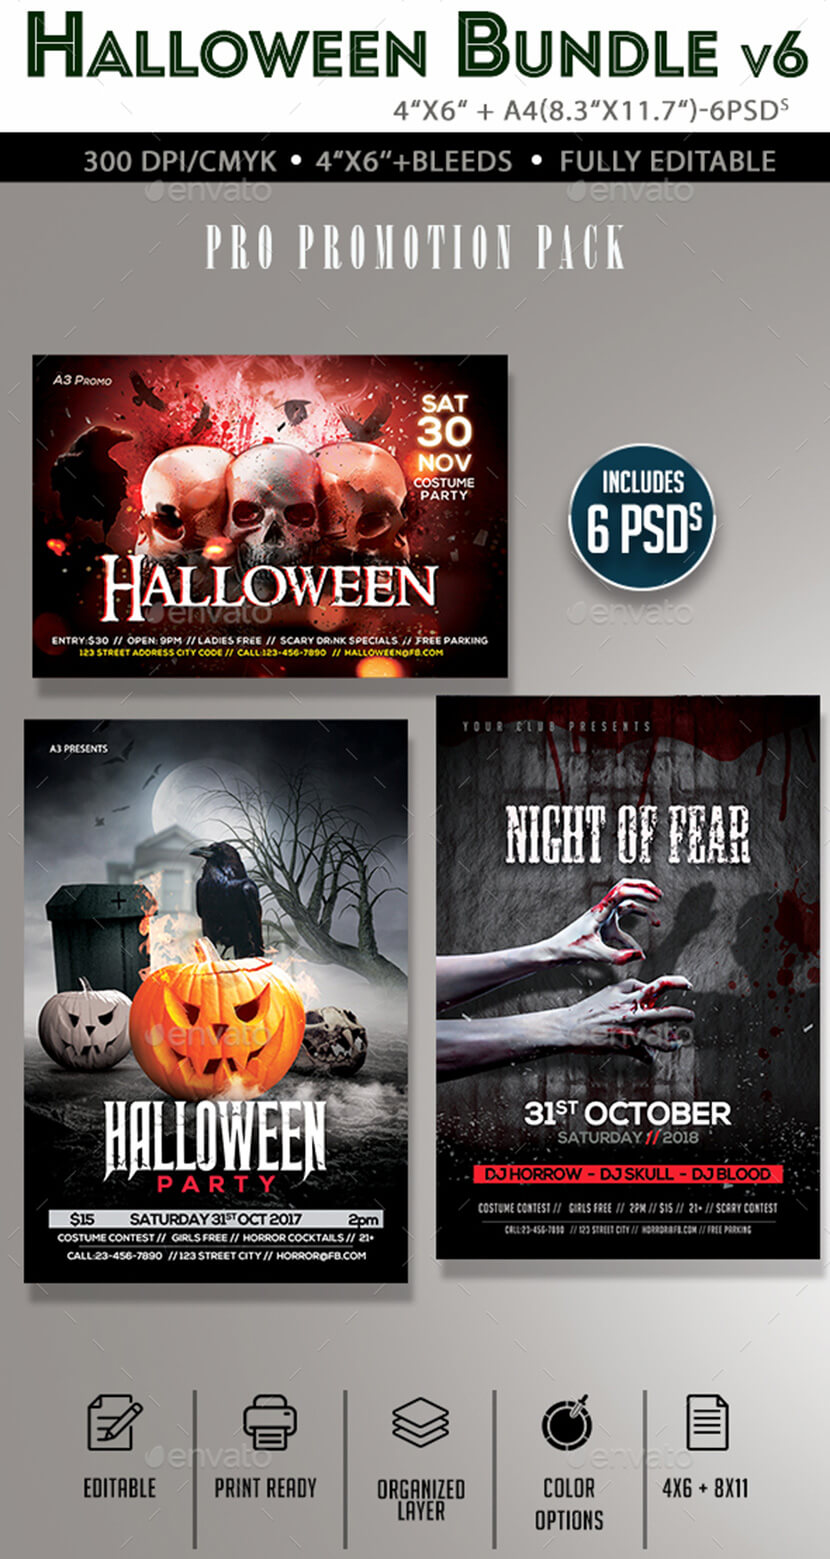 Fantastic Halloween Graphics: Flyers, Icons, Fonts, Videos - WP Daddy